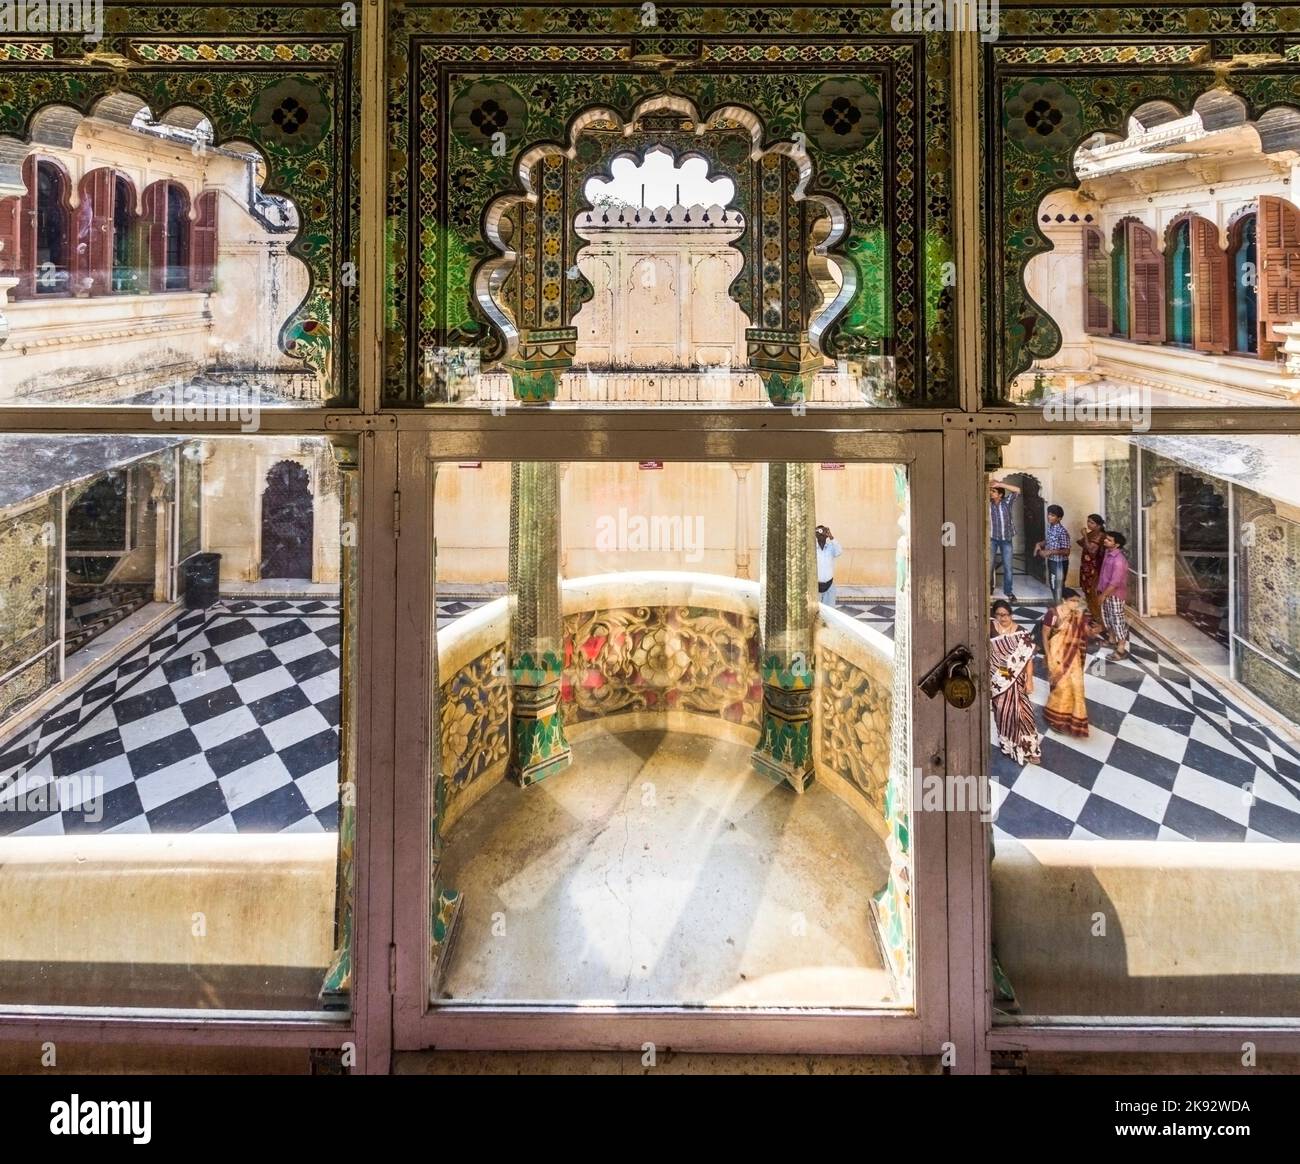 UDAIPUR, INDIA - OCT 21, 2012: local people visit the City Palace in Udaipur, India. The foundation of the fort was laid in 1559  by Udai Singh. Stock Photo